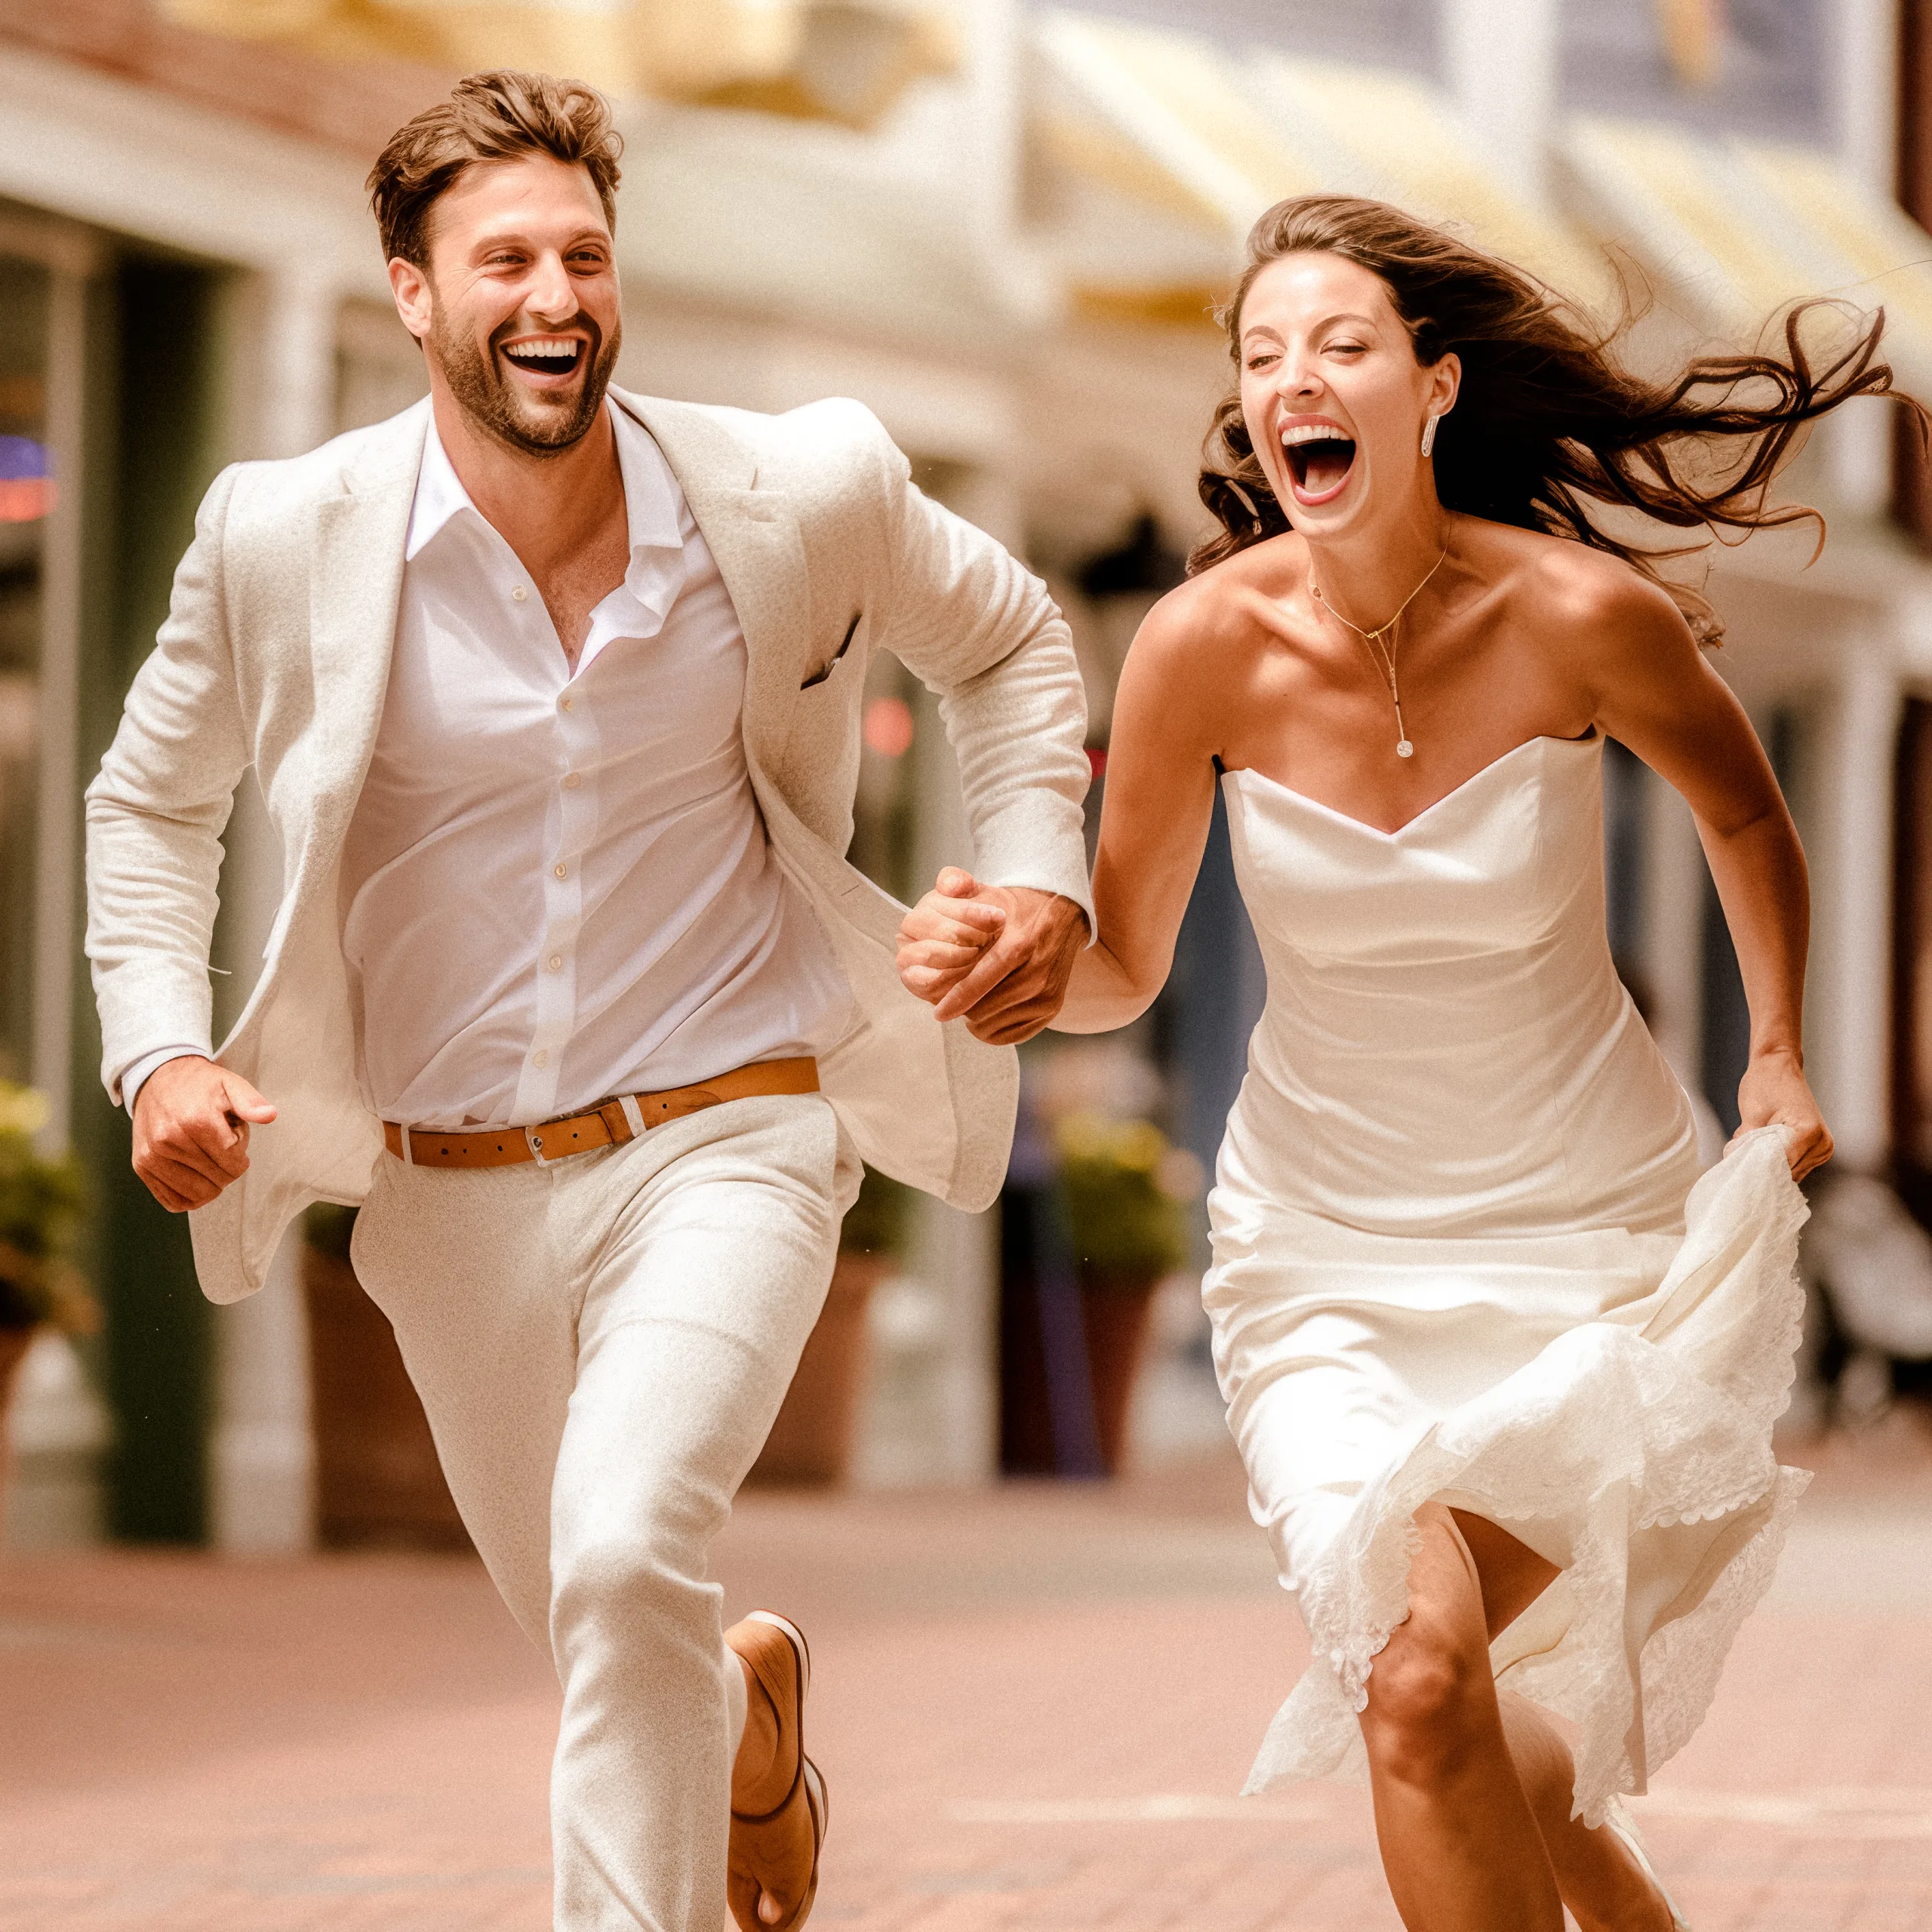 Running Bride and Groom: You want more wedding bookings?